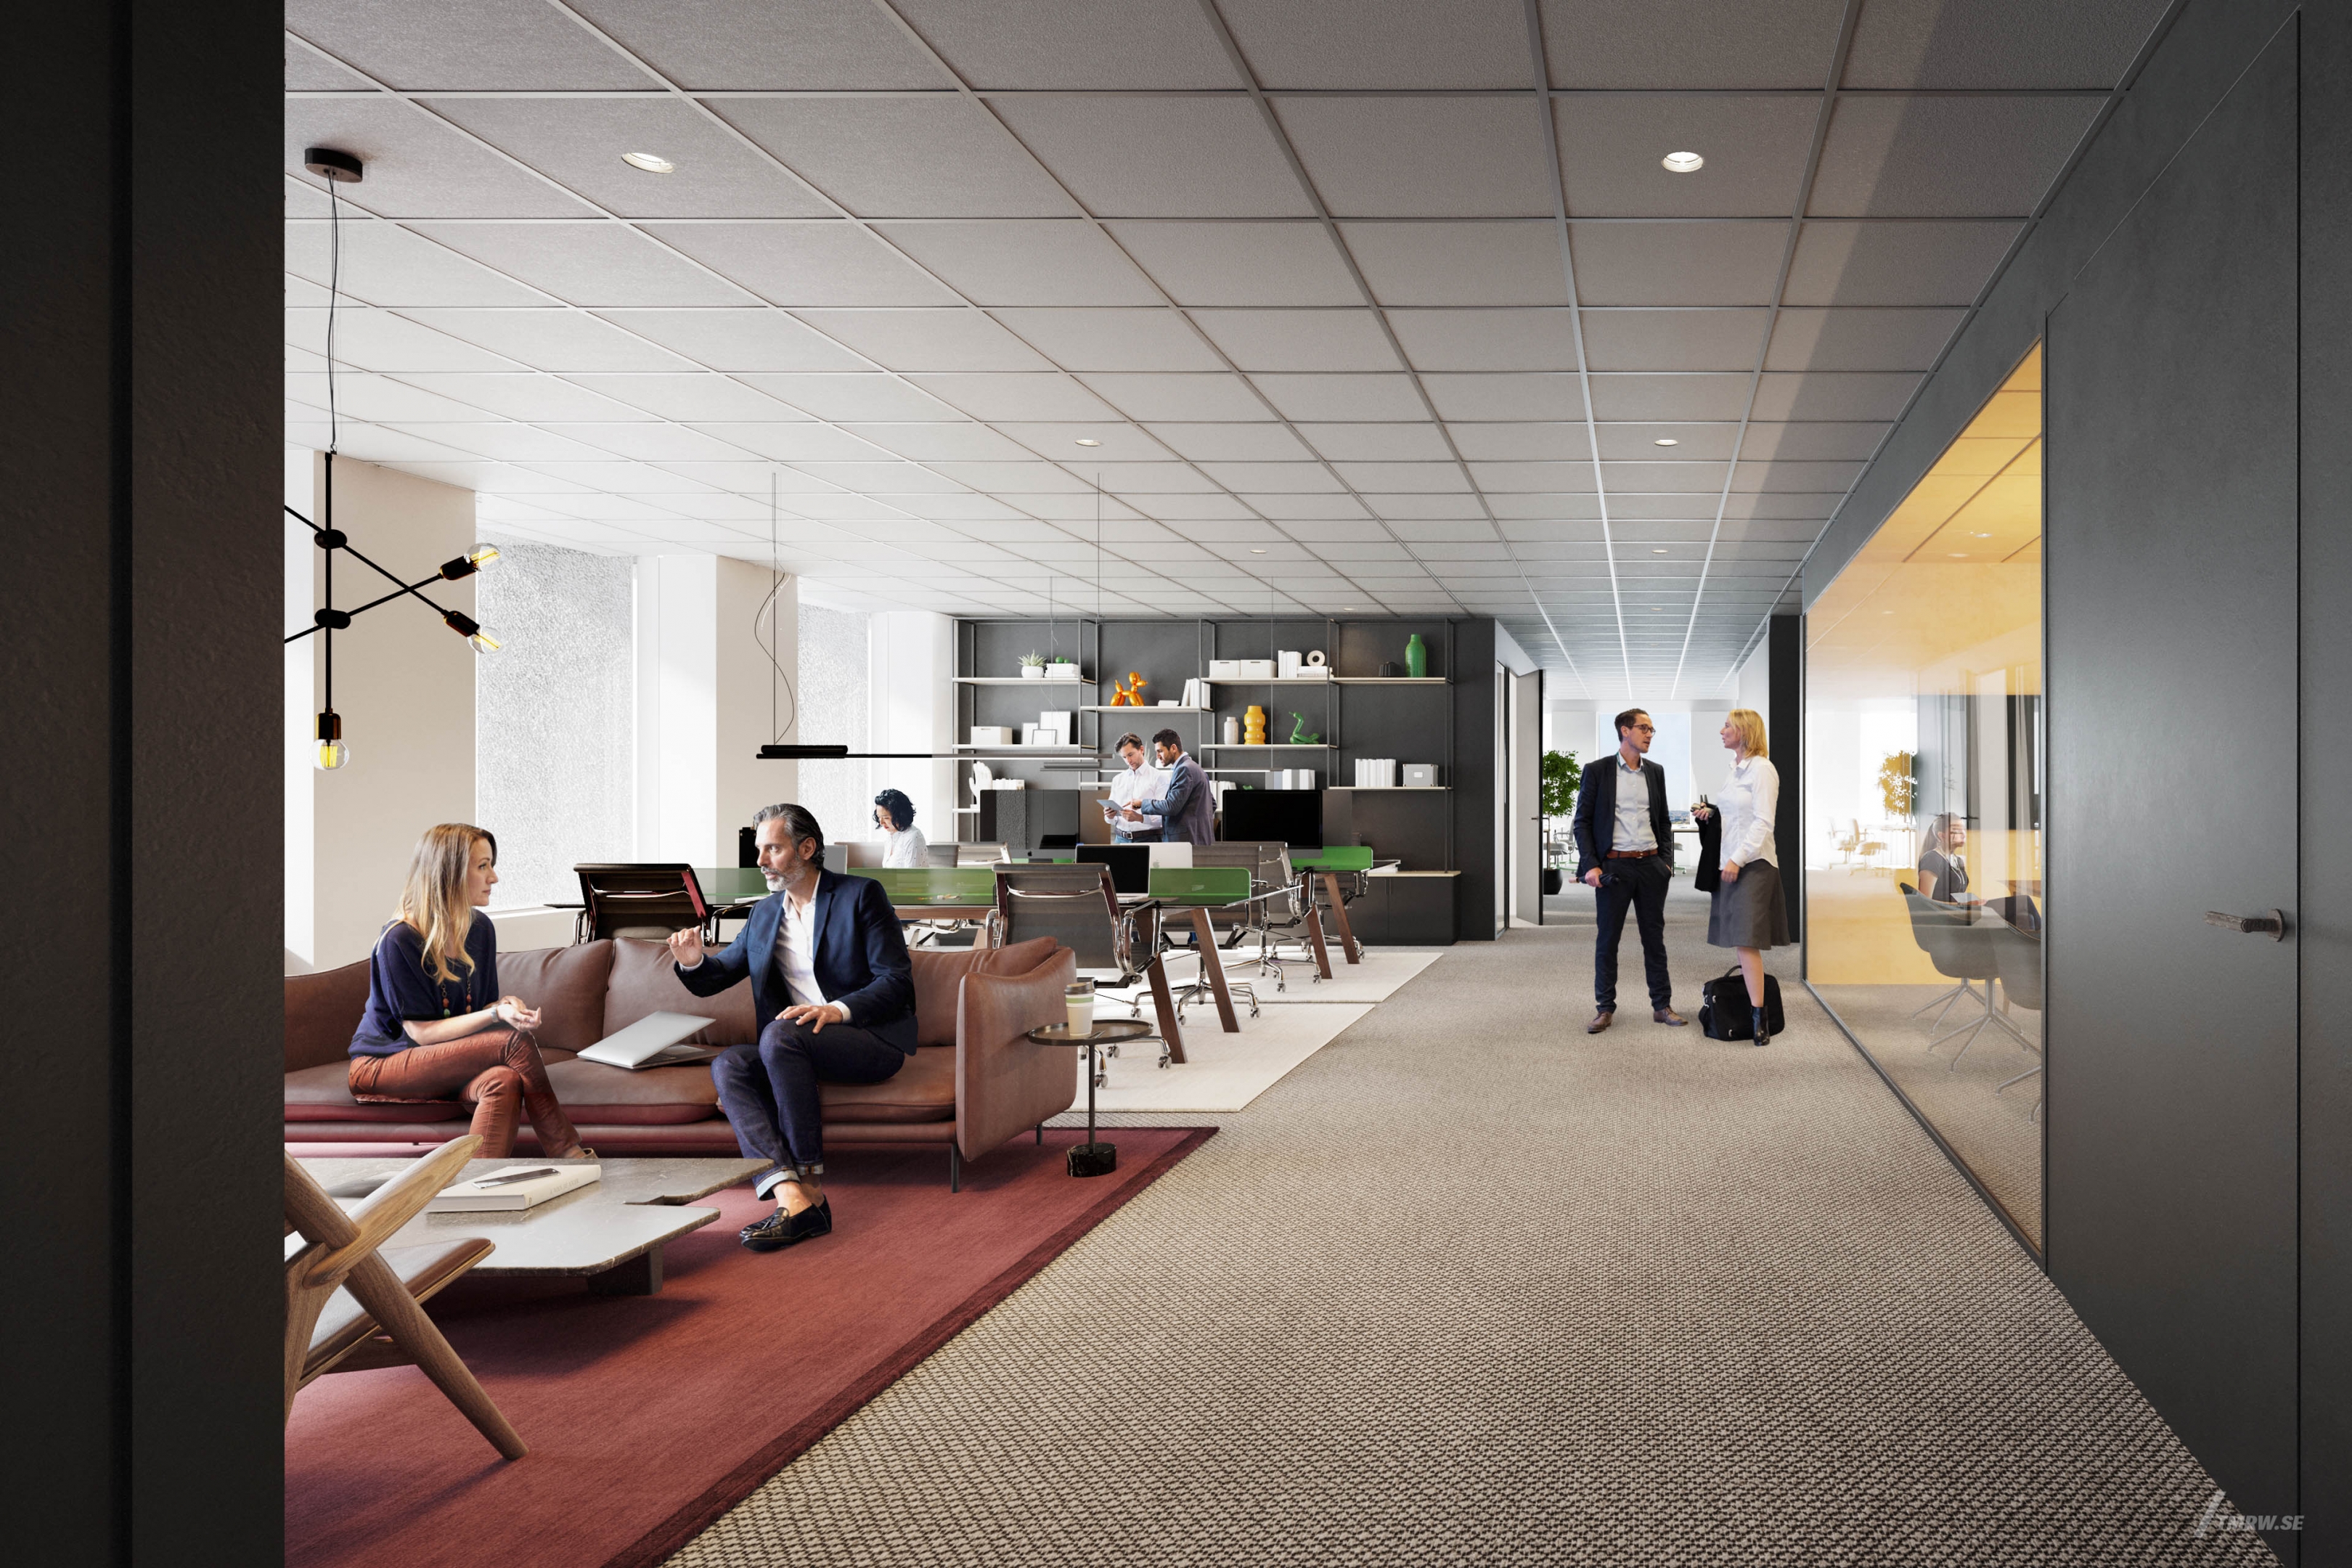 Architectural visualization of Karlberg Strand for JM a office area in day light from a interior view.